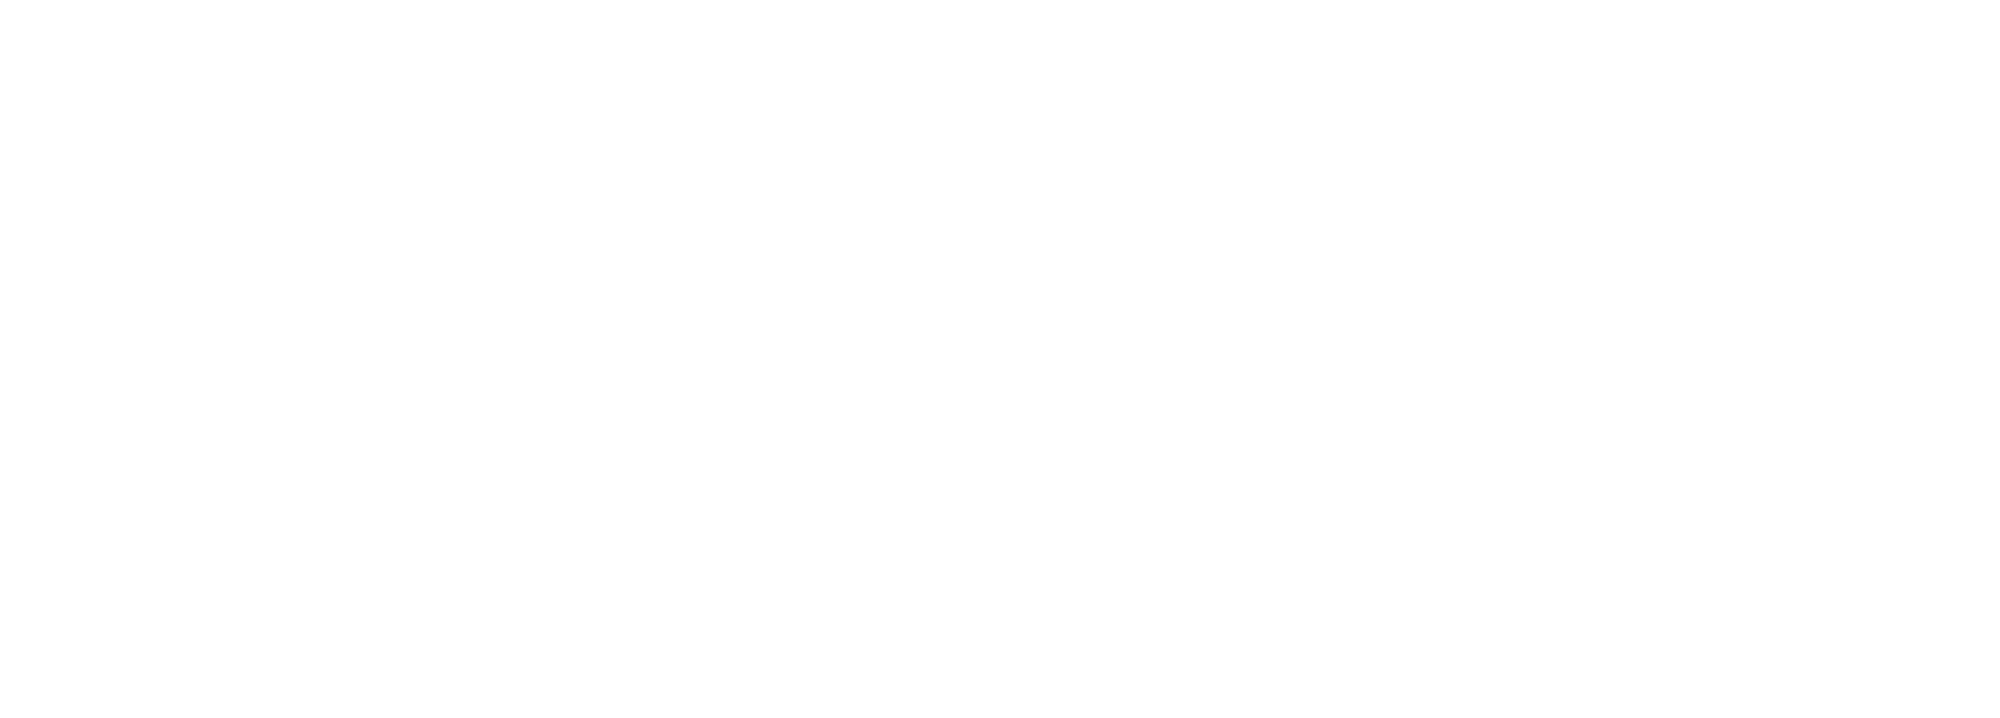 Specialty Fabricating Co.